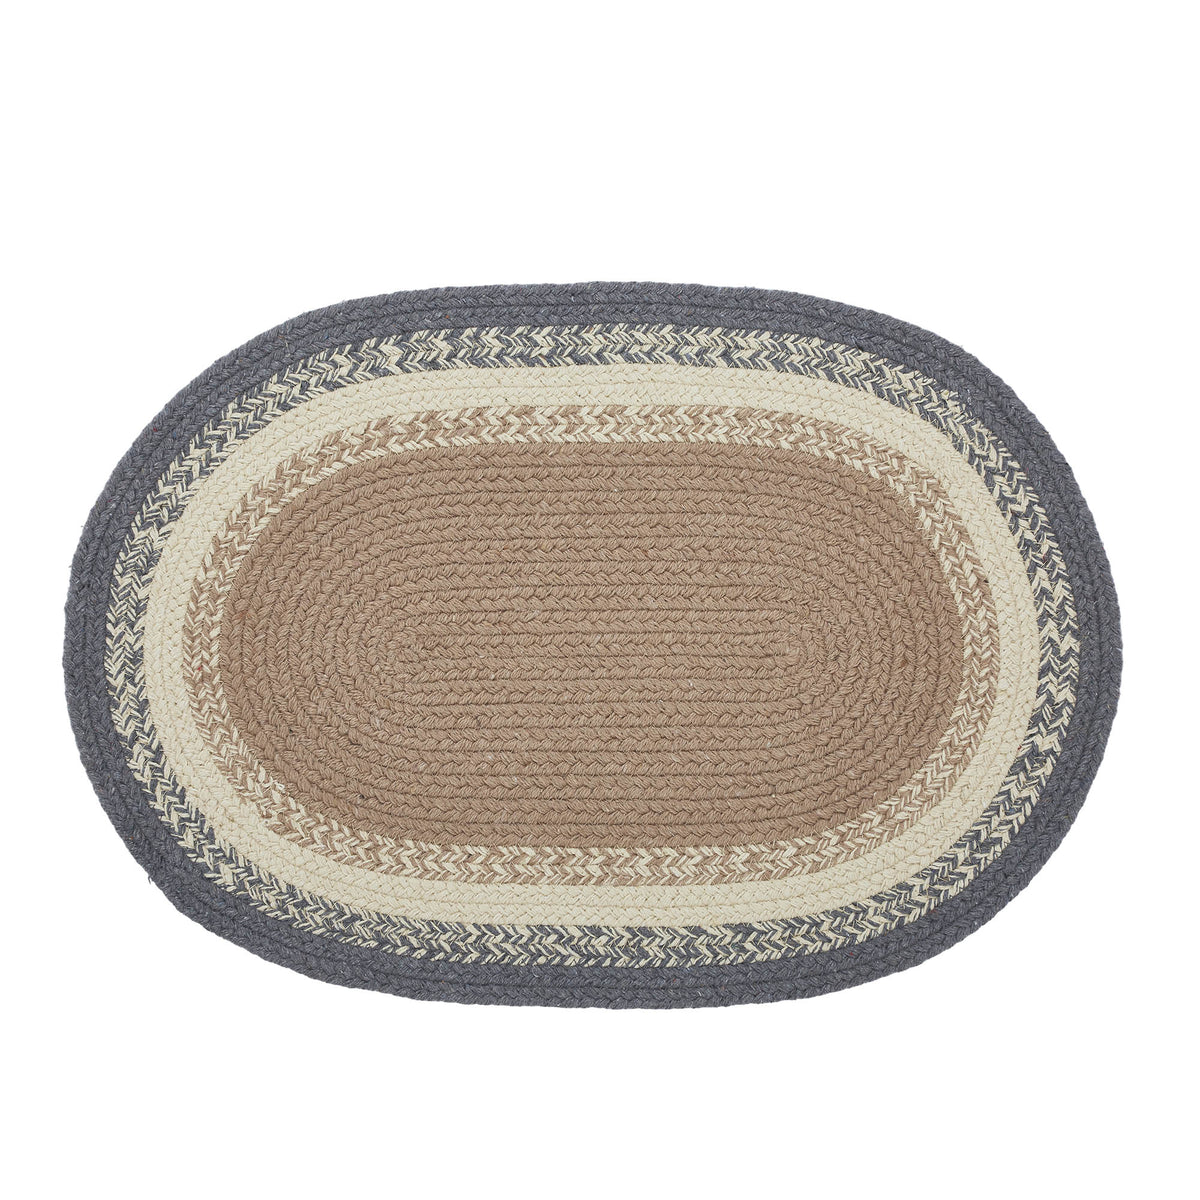 Finders Keepers Oval Placemat 13x19